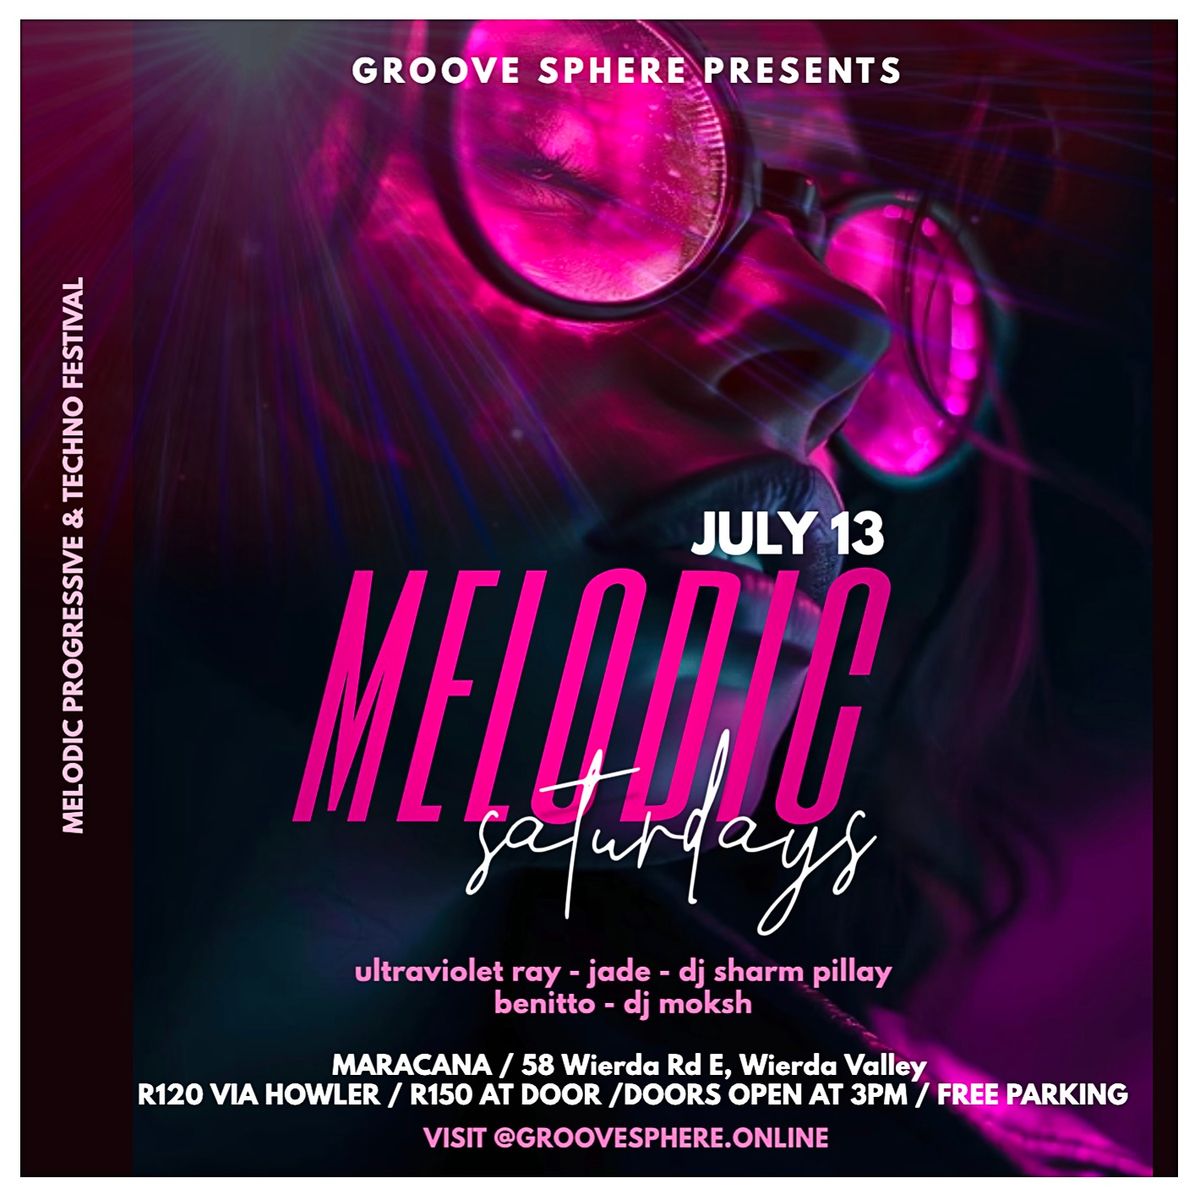 Melodic Saturday's by GROOVE SPHERE & Maracana